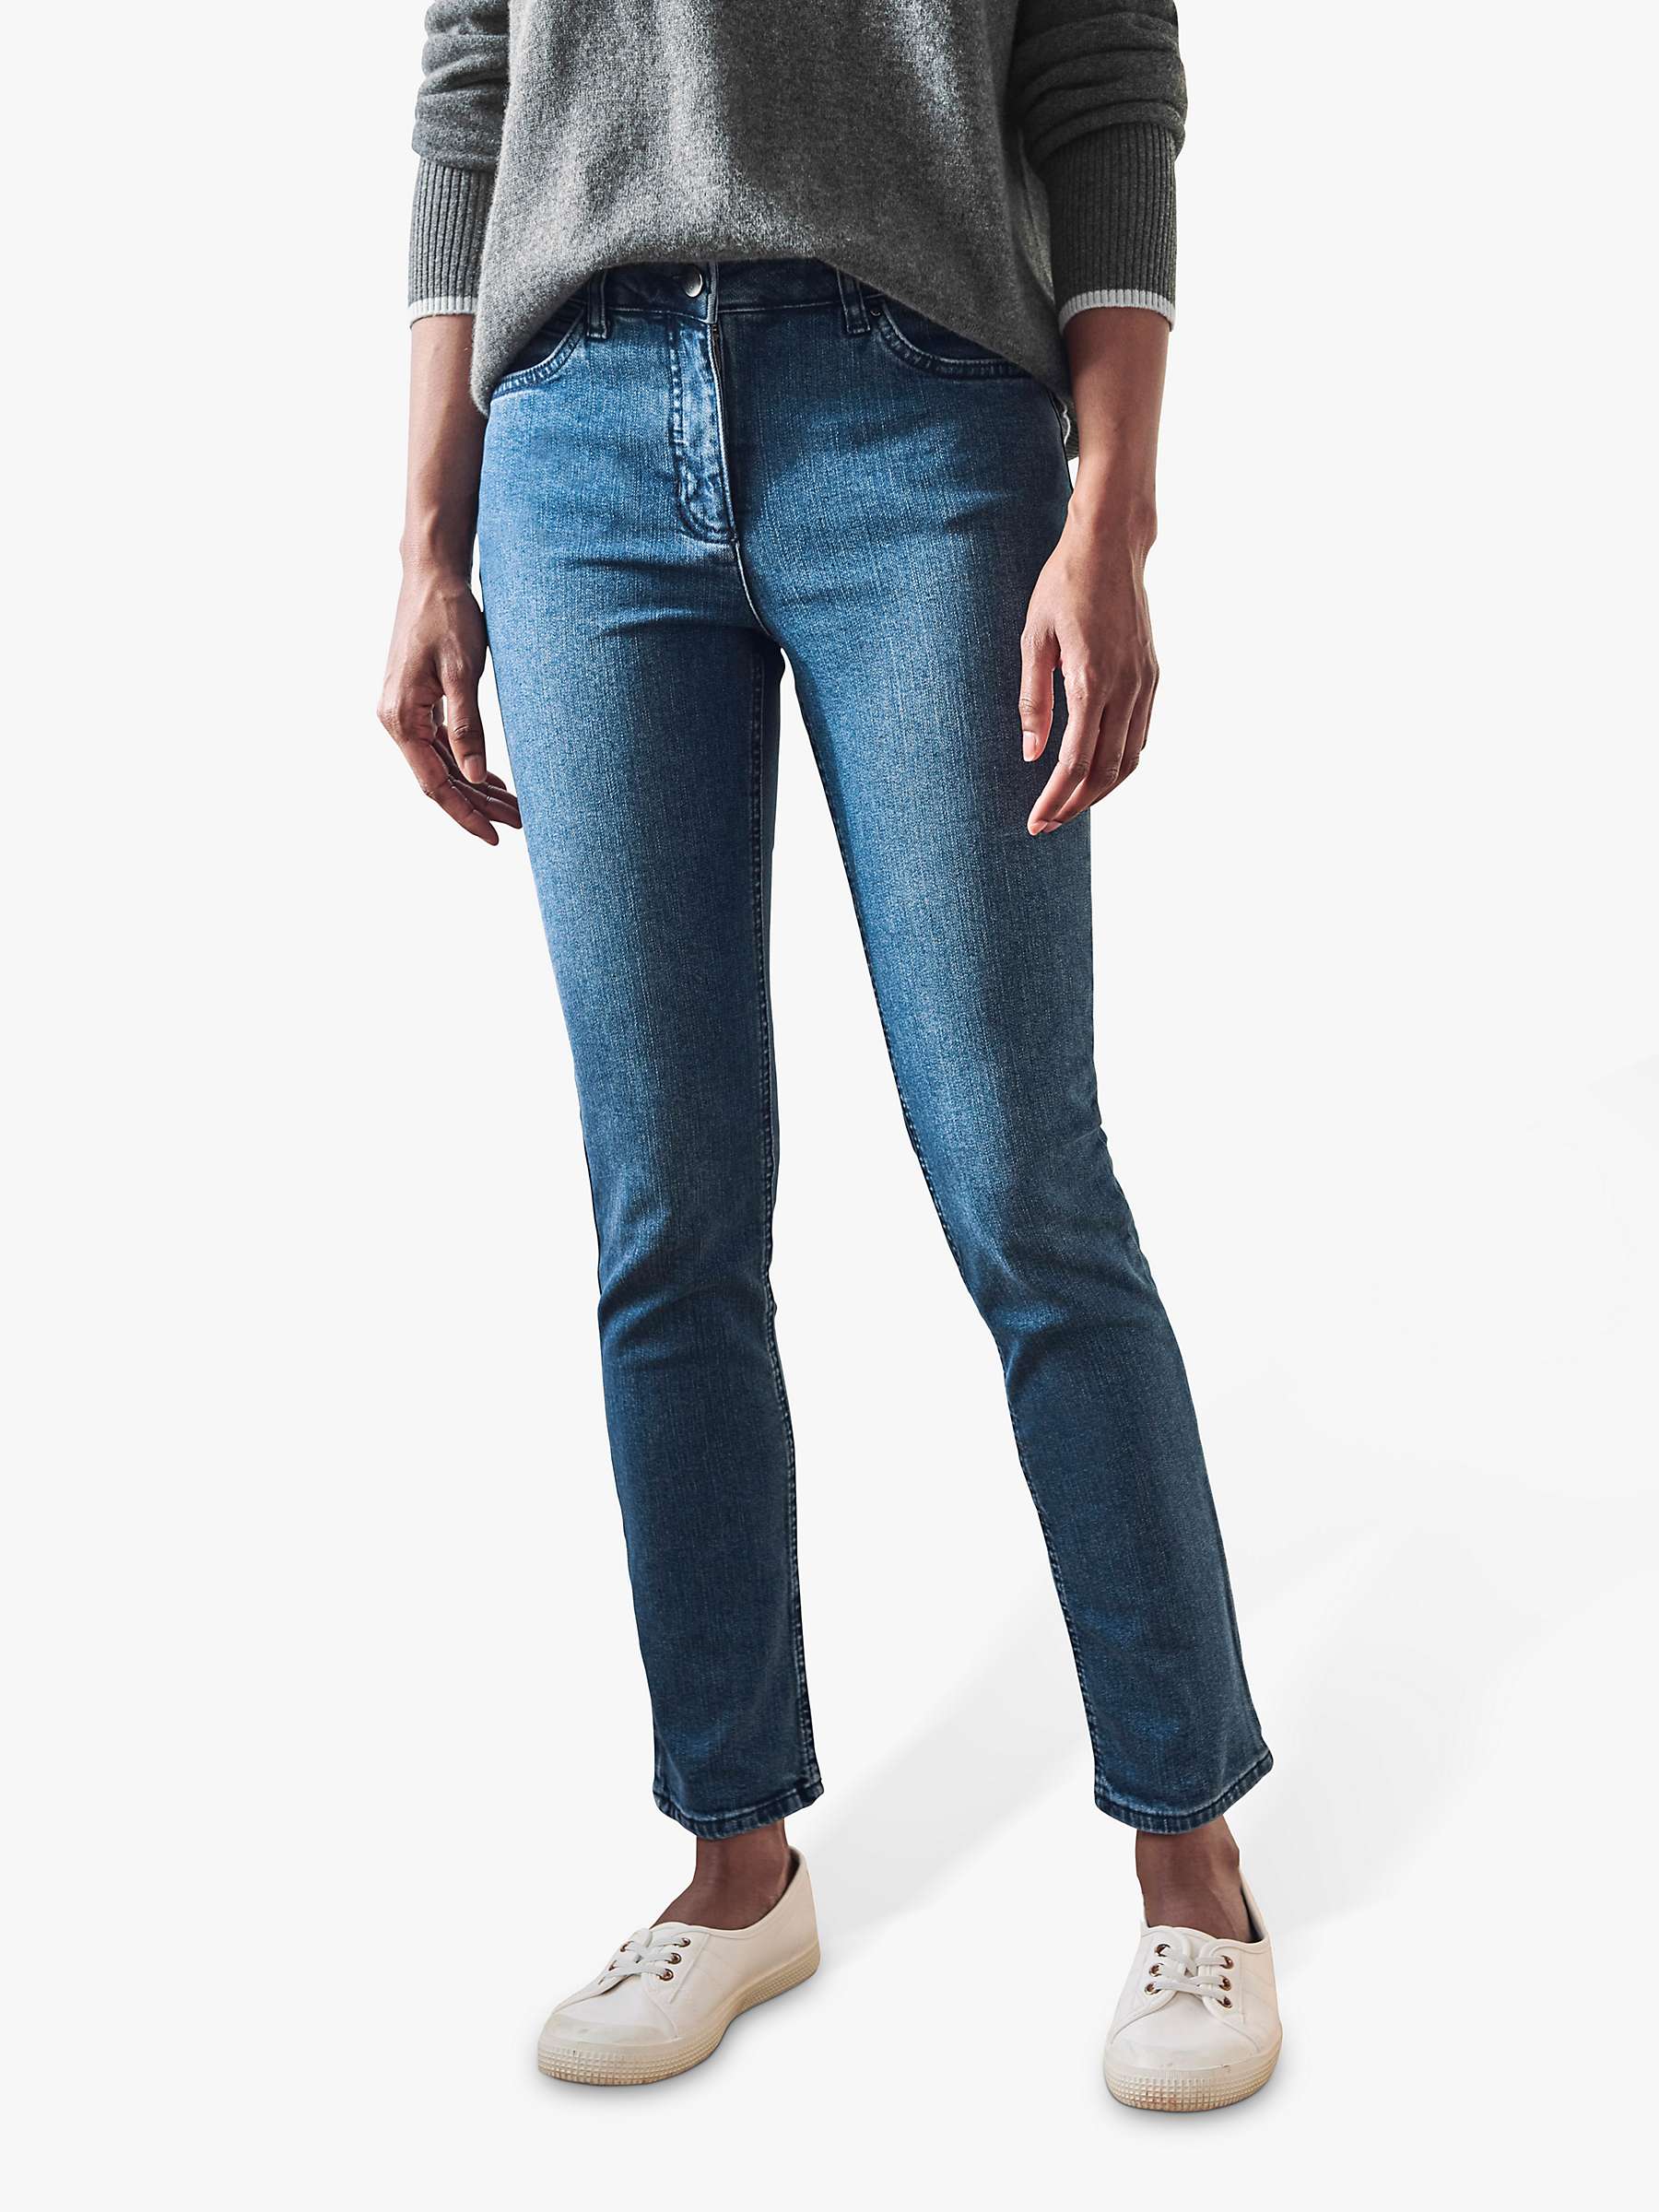 Buy Pure Collection Ankle Grazer Skinny Jeans, Mid Wash Online at johnlewis.com